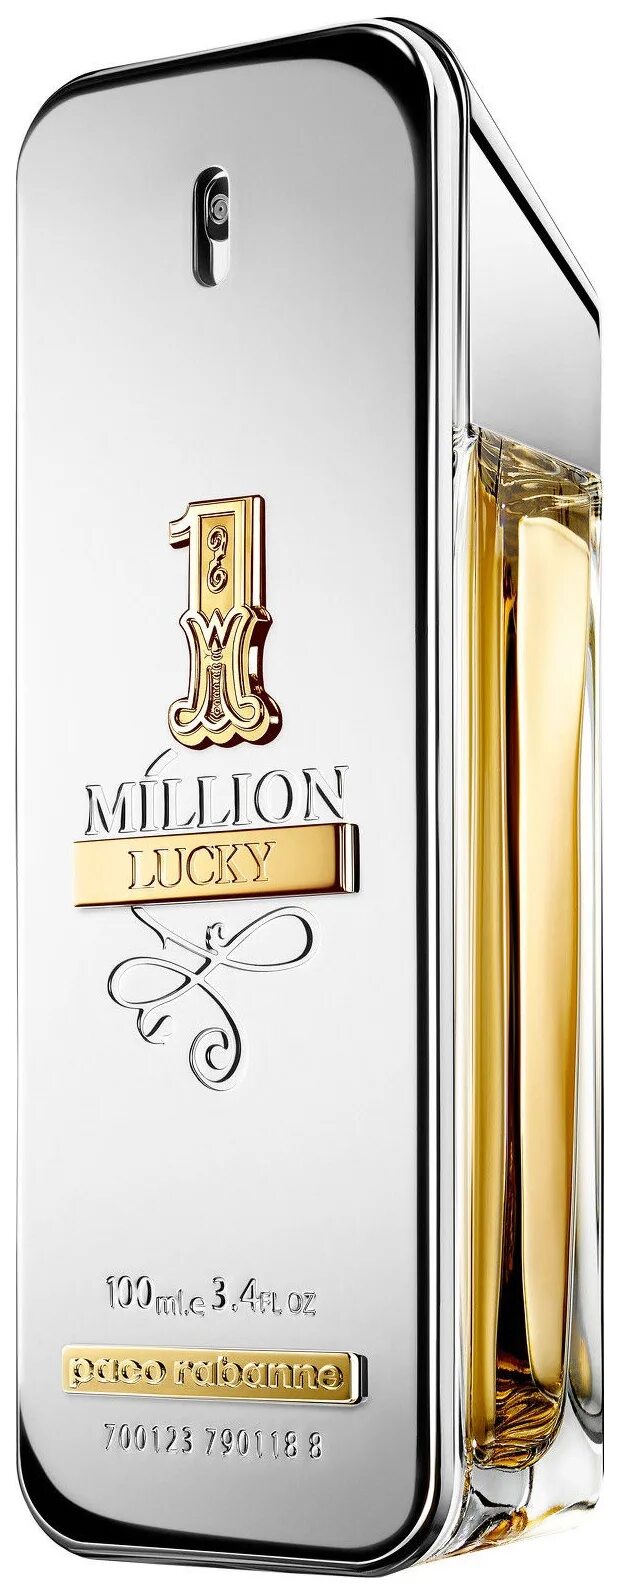 One million lucky. One million Lucky Paco Rabanne мужские. Paco Rabanne 1 million Lucky. Paco Rabanne 1 million Lucky men. 1 Million Paco Rabanne Lucky мужские 100ml.